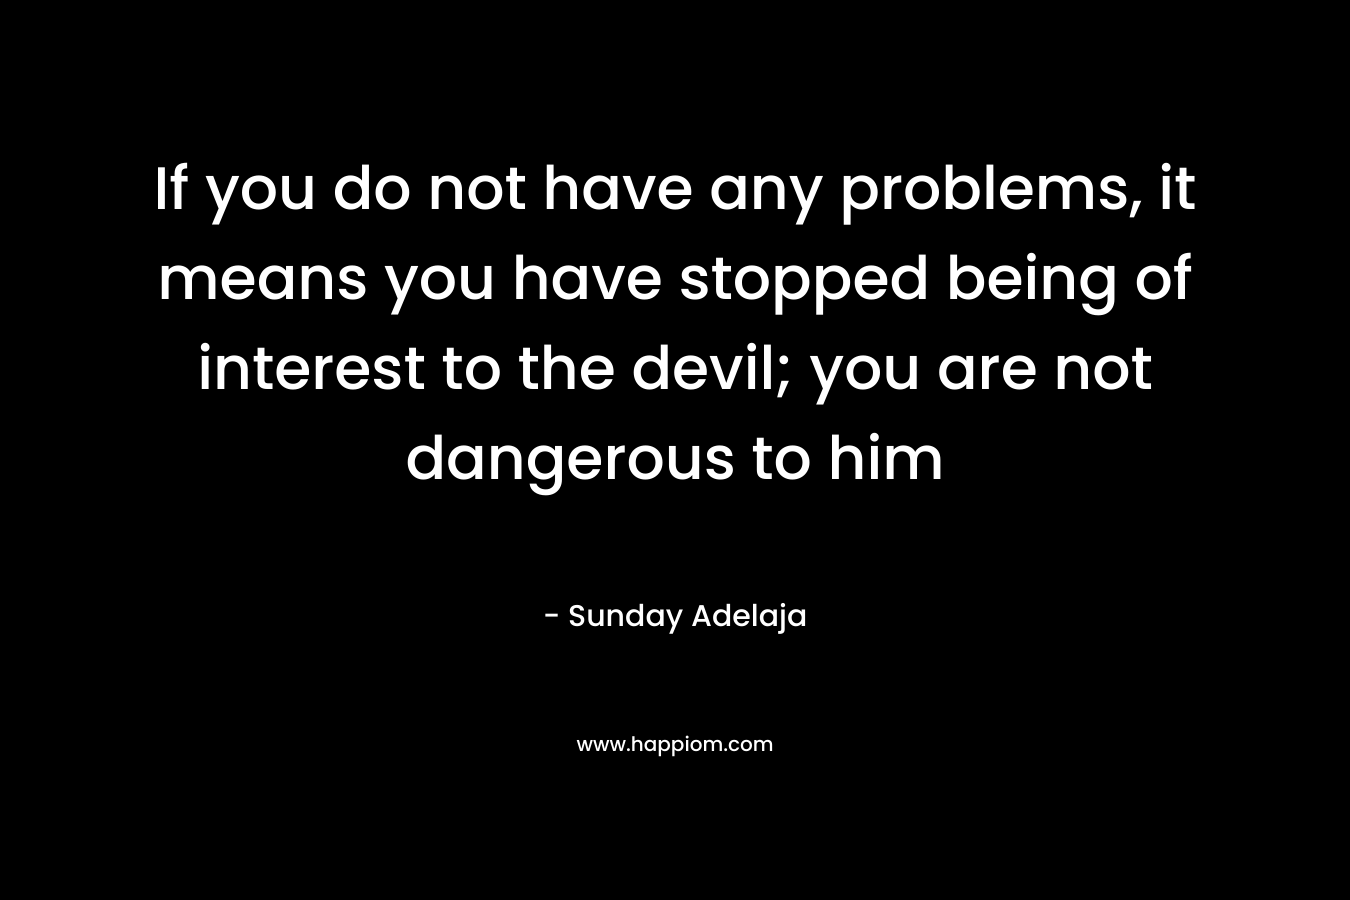 If you do not have any problems, it means you have stopped being of interest to the devil; you are not dangerous to him